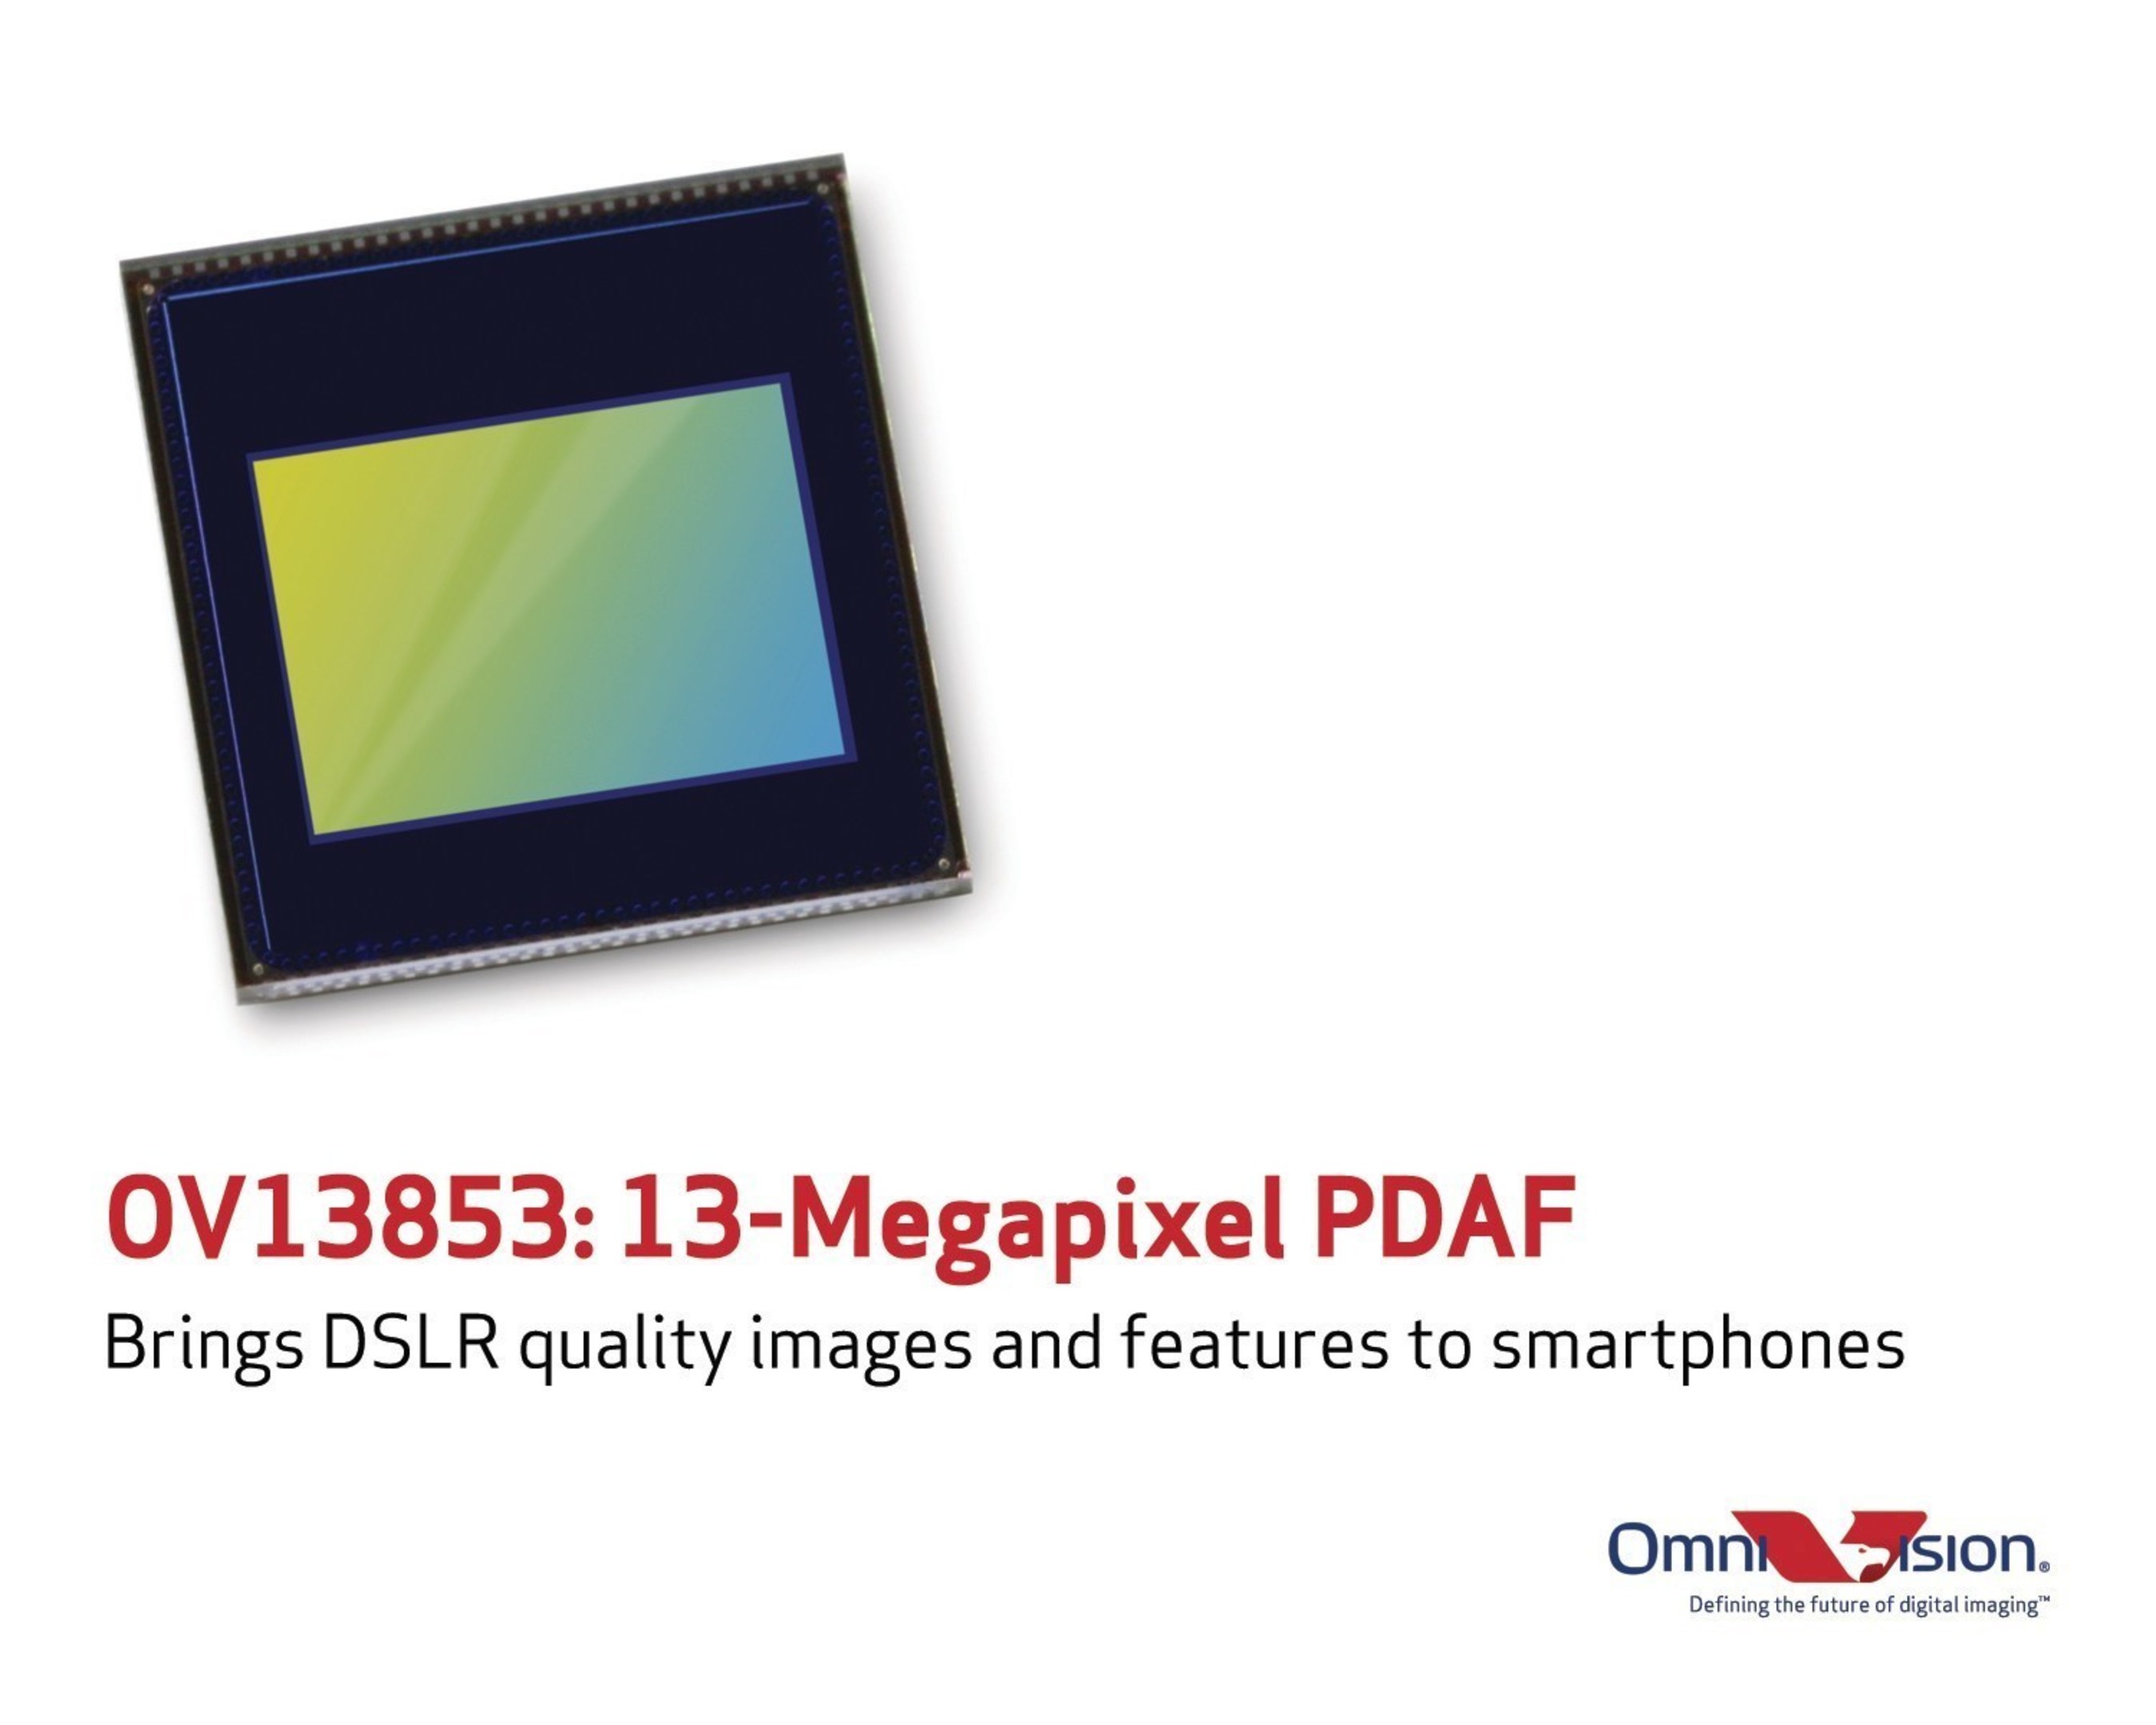 OmniVision's OV13853 brings DSLR quality images and features to smartphones.